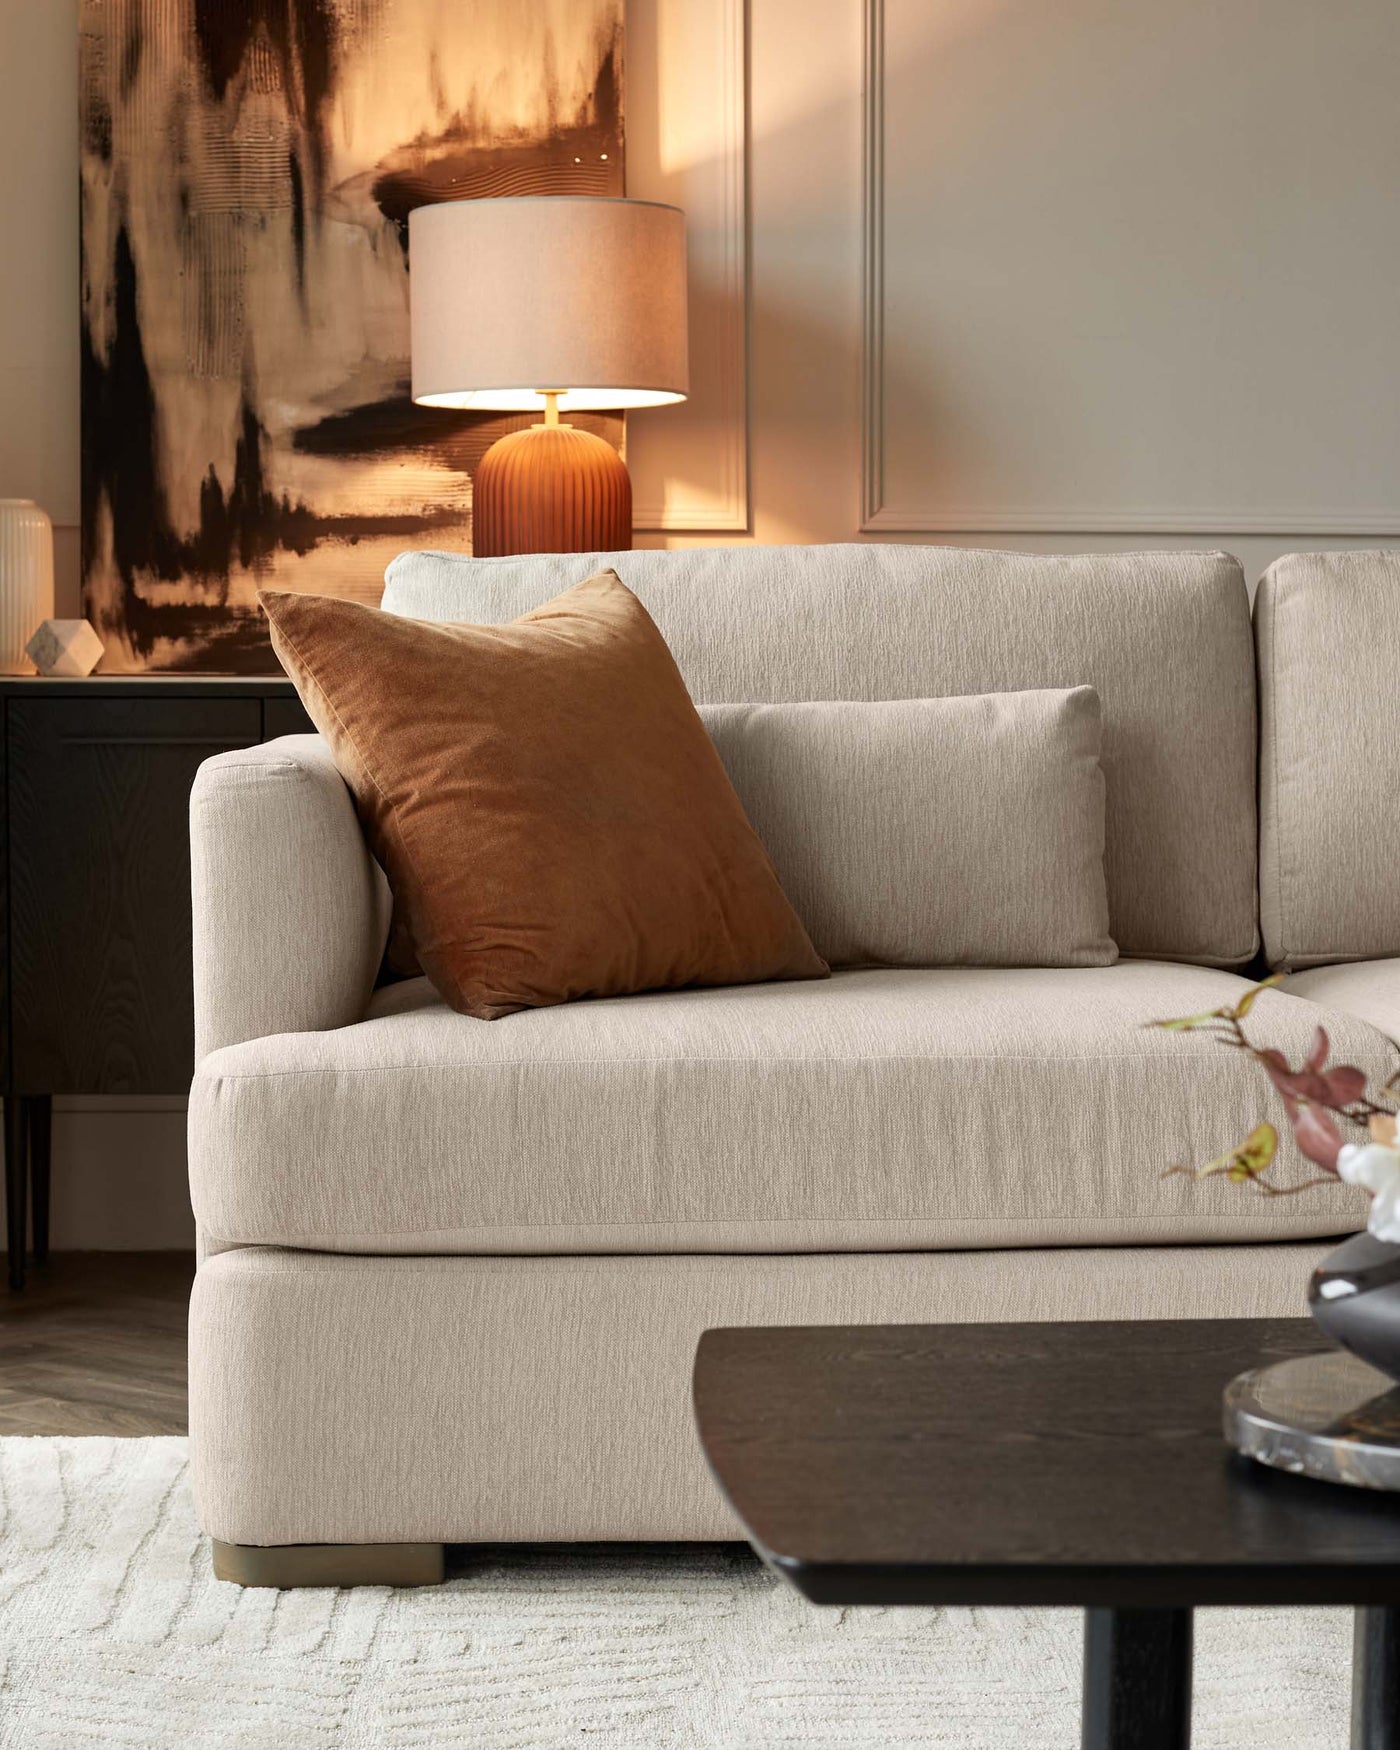 A cosy beige contemporary sofa with a textured fabric is adorned with a plush cinnamon brown throw pillow. Complementing the seating arrangement is a dark wooden coffee table with a rounded triangular top, set on a textured off-white area rug. A modern table lamp with a warm-toned ceramic base and a cream lampshade casts a soft glow, placed on a sleek black sideboard in the background featuring subtle panel detailing. An abstract wall art with earthy tones adds a sophisticated touch to the decor.